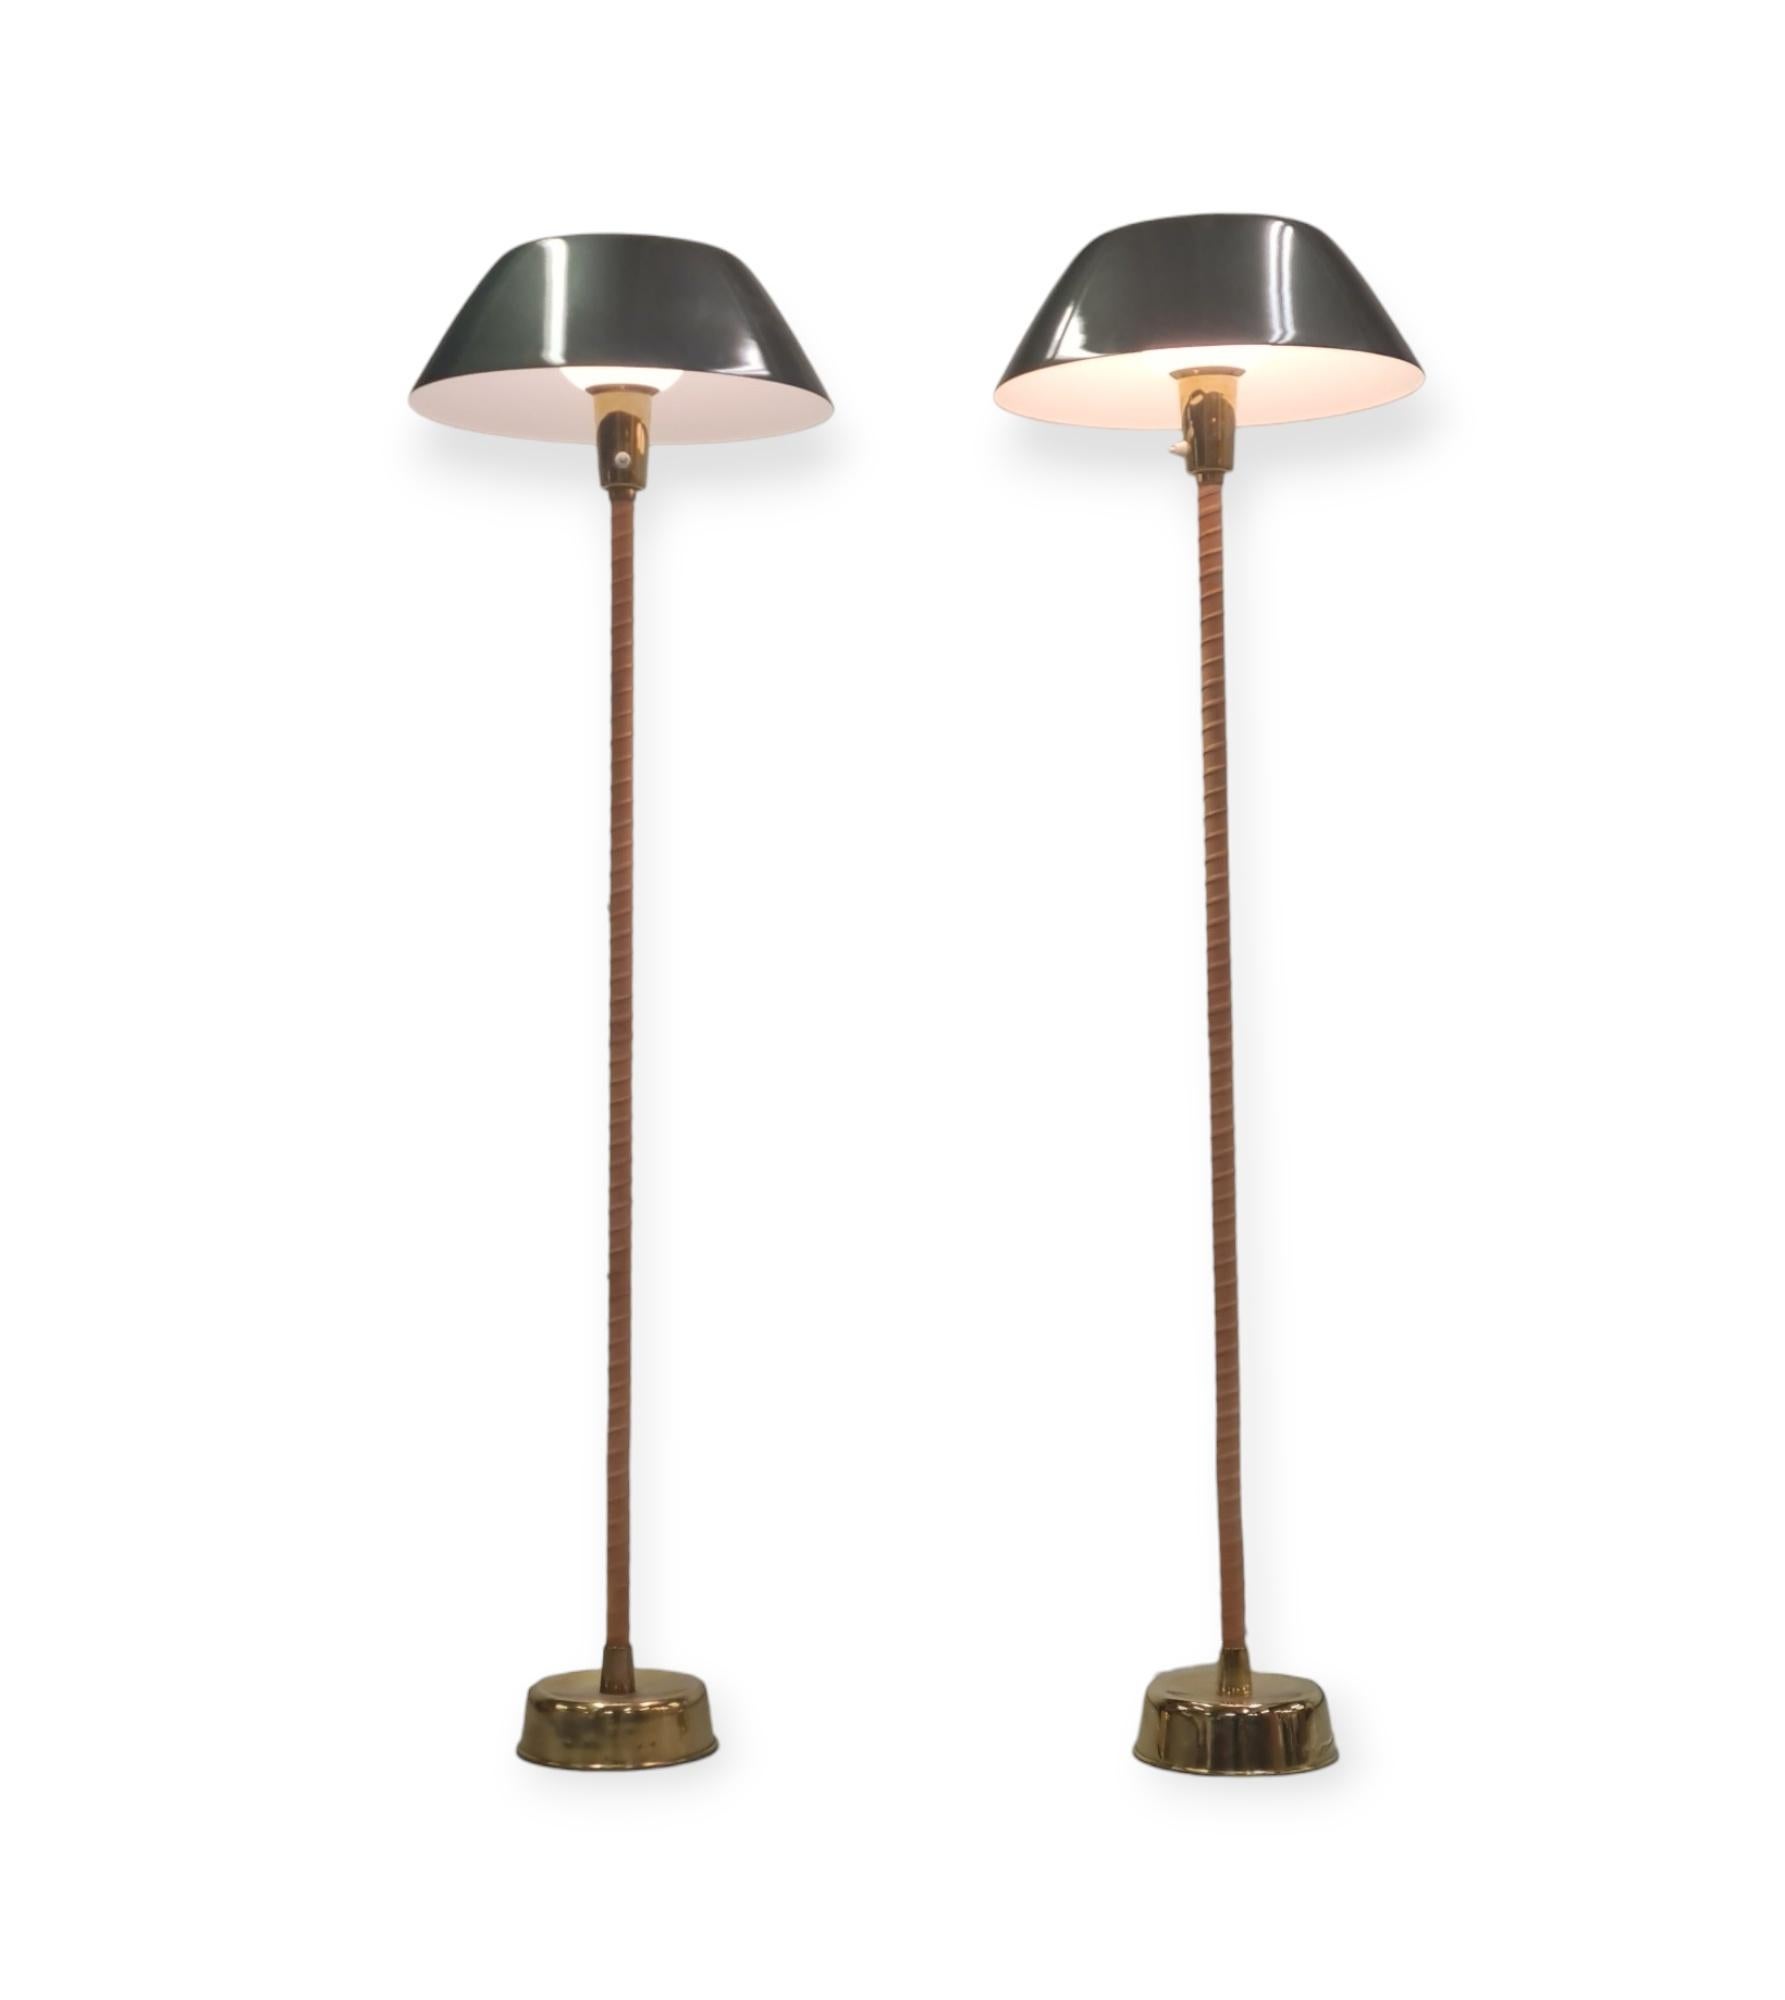 Lisa Johansson-Pape(1907-1989) was a Finnish designer best known for her works in lightings. She paid more attention to the function of the lamp firstly, then the design feature secondly.
Lisa designed furniture for Stockmann for a number of years,